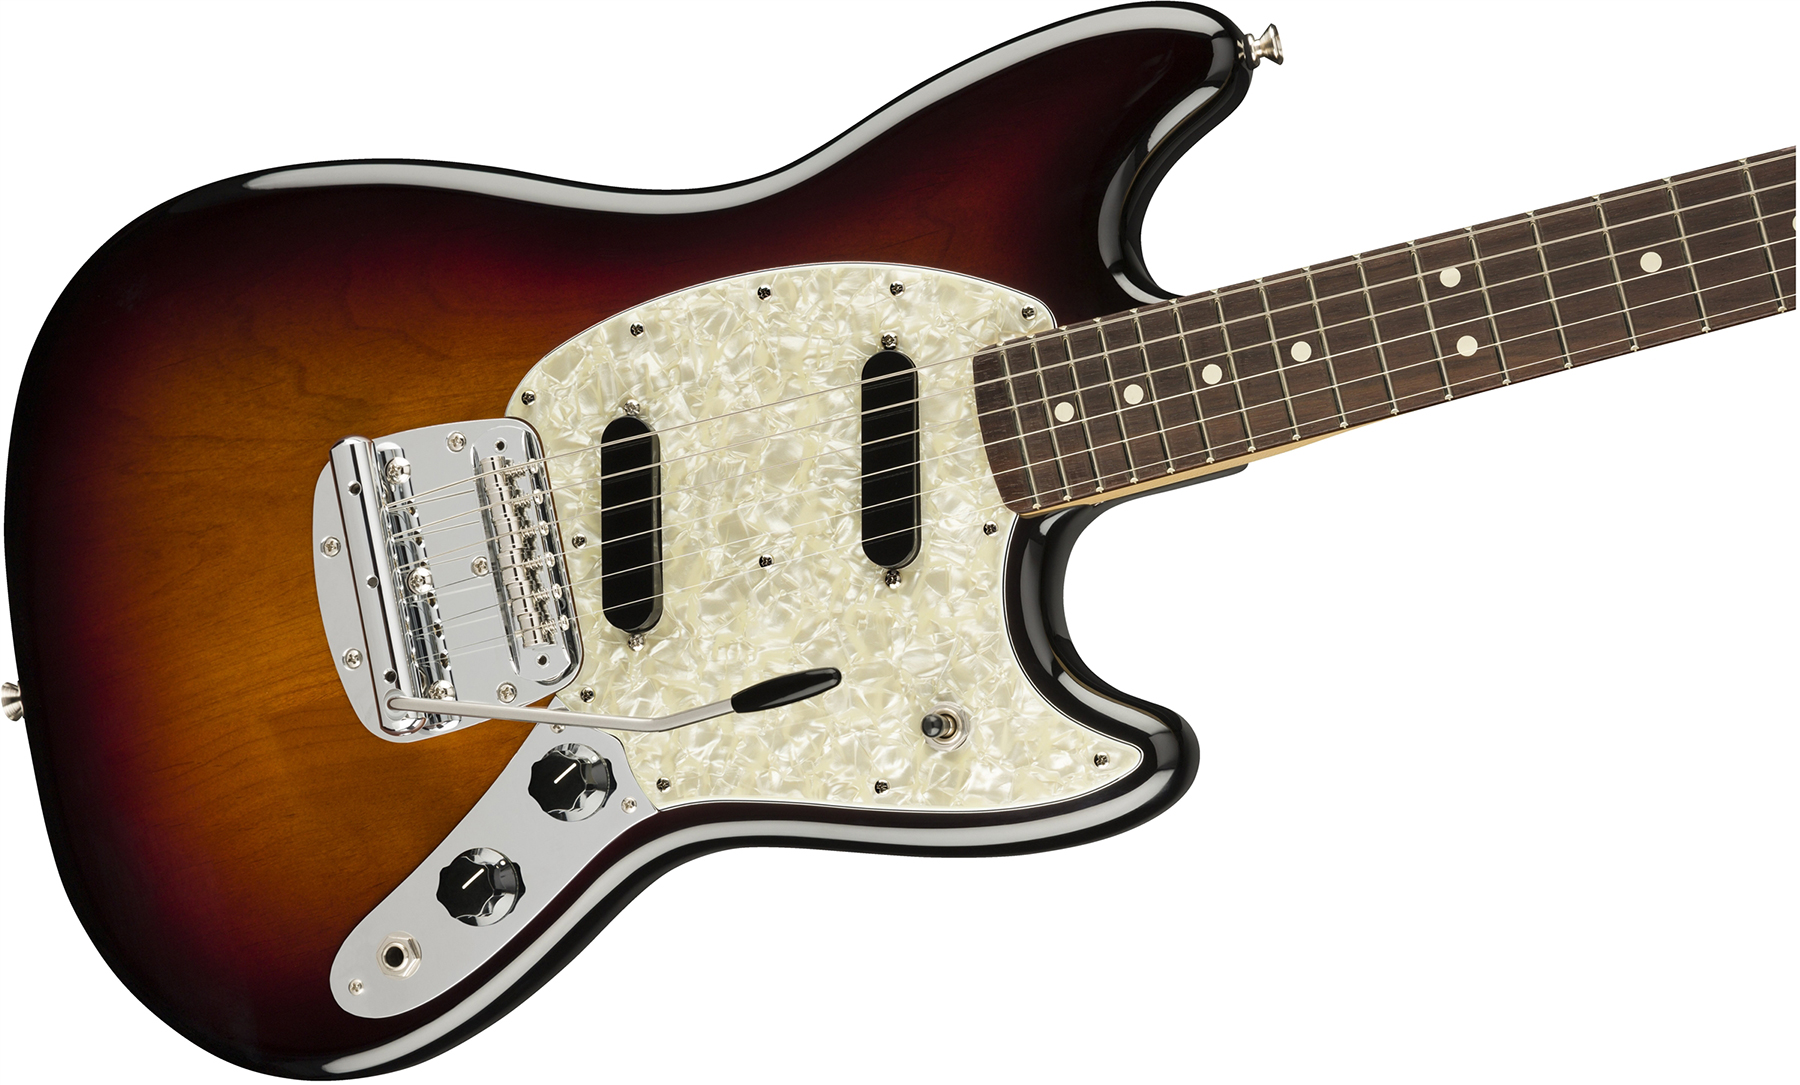 Fender Mustang American Performer Usa Ss Rw - 3-color Sunburst - Double cut electric guitar - Variation 2